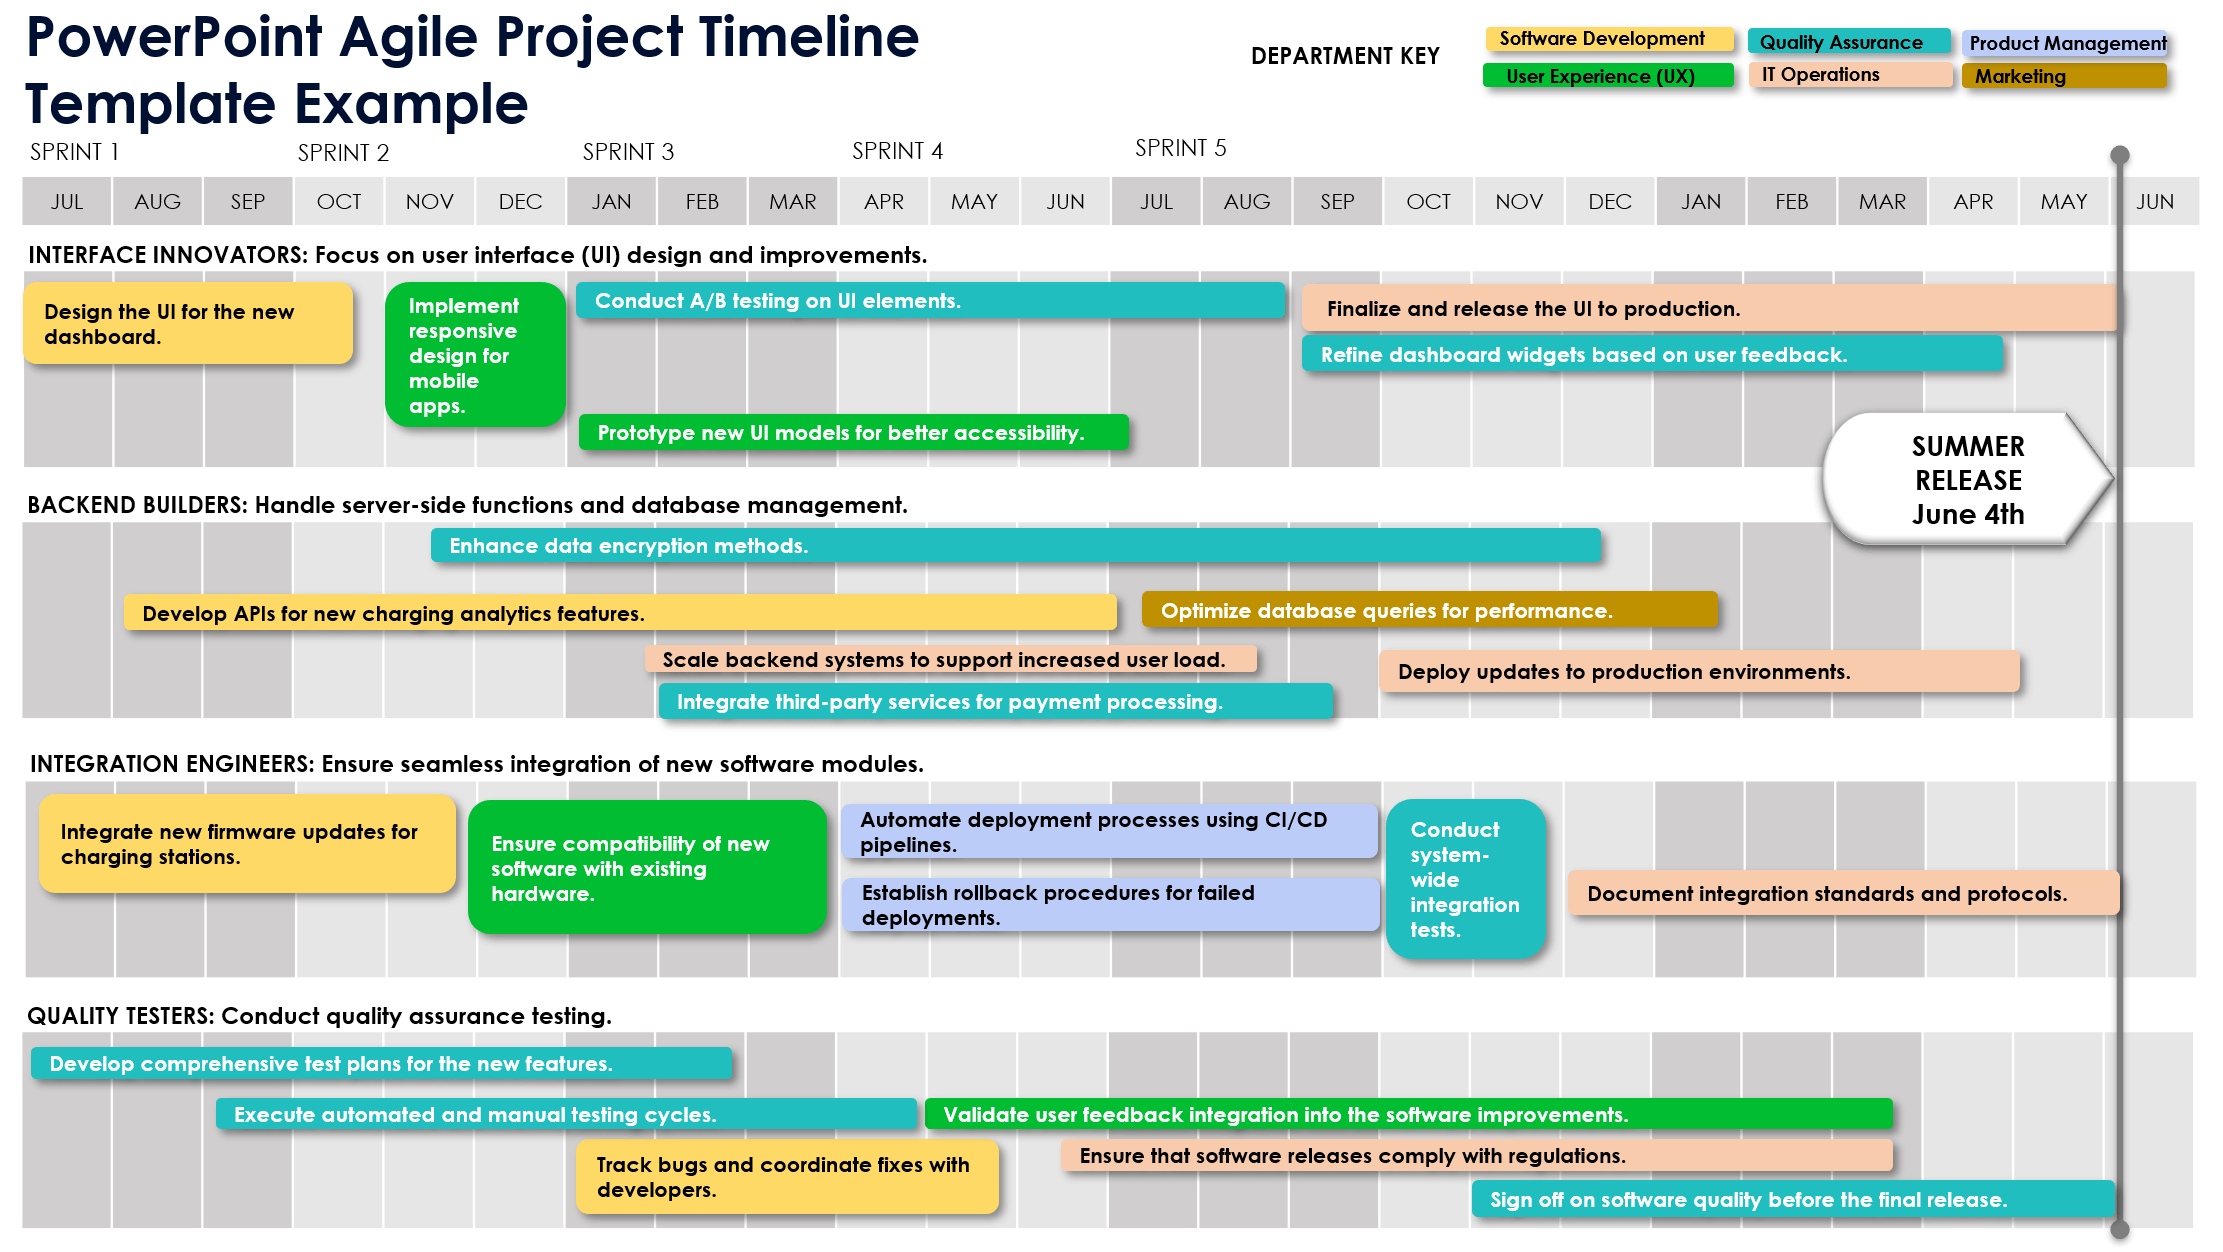 PowerPoint Agile Project Timeline Template Example